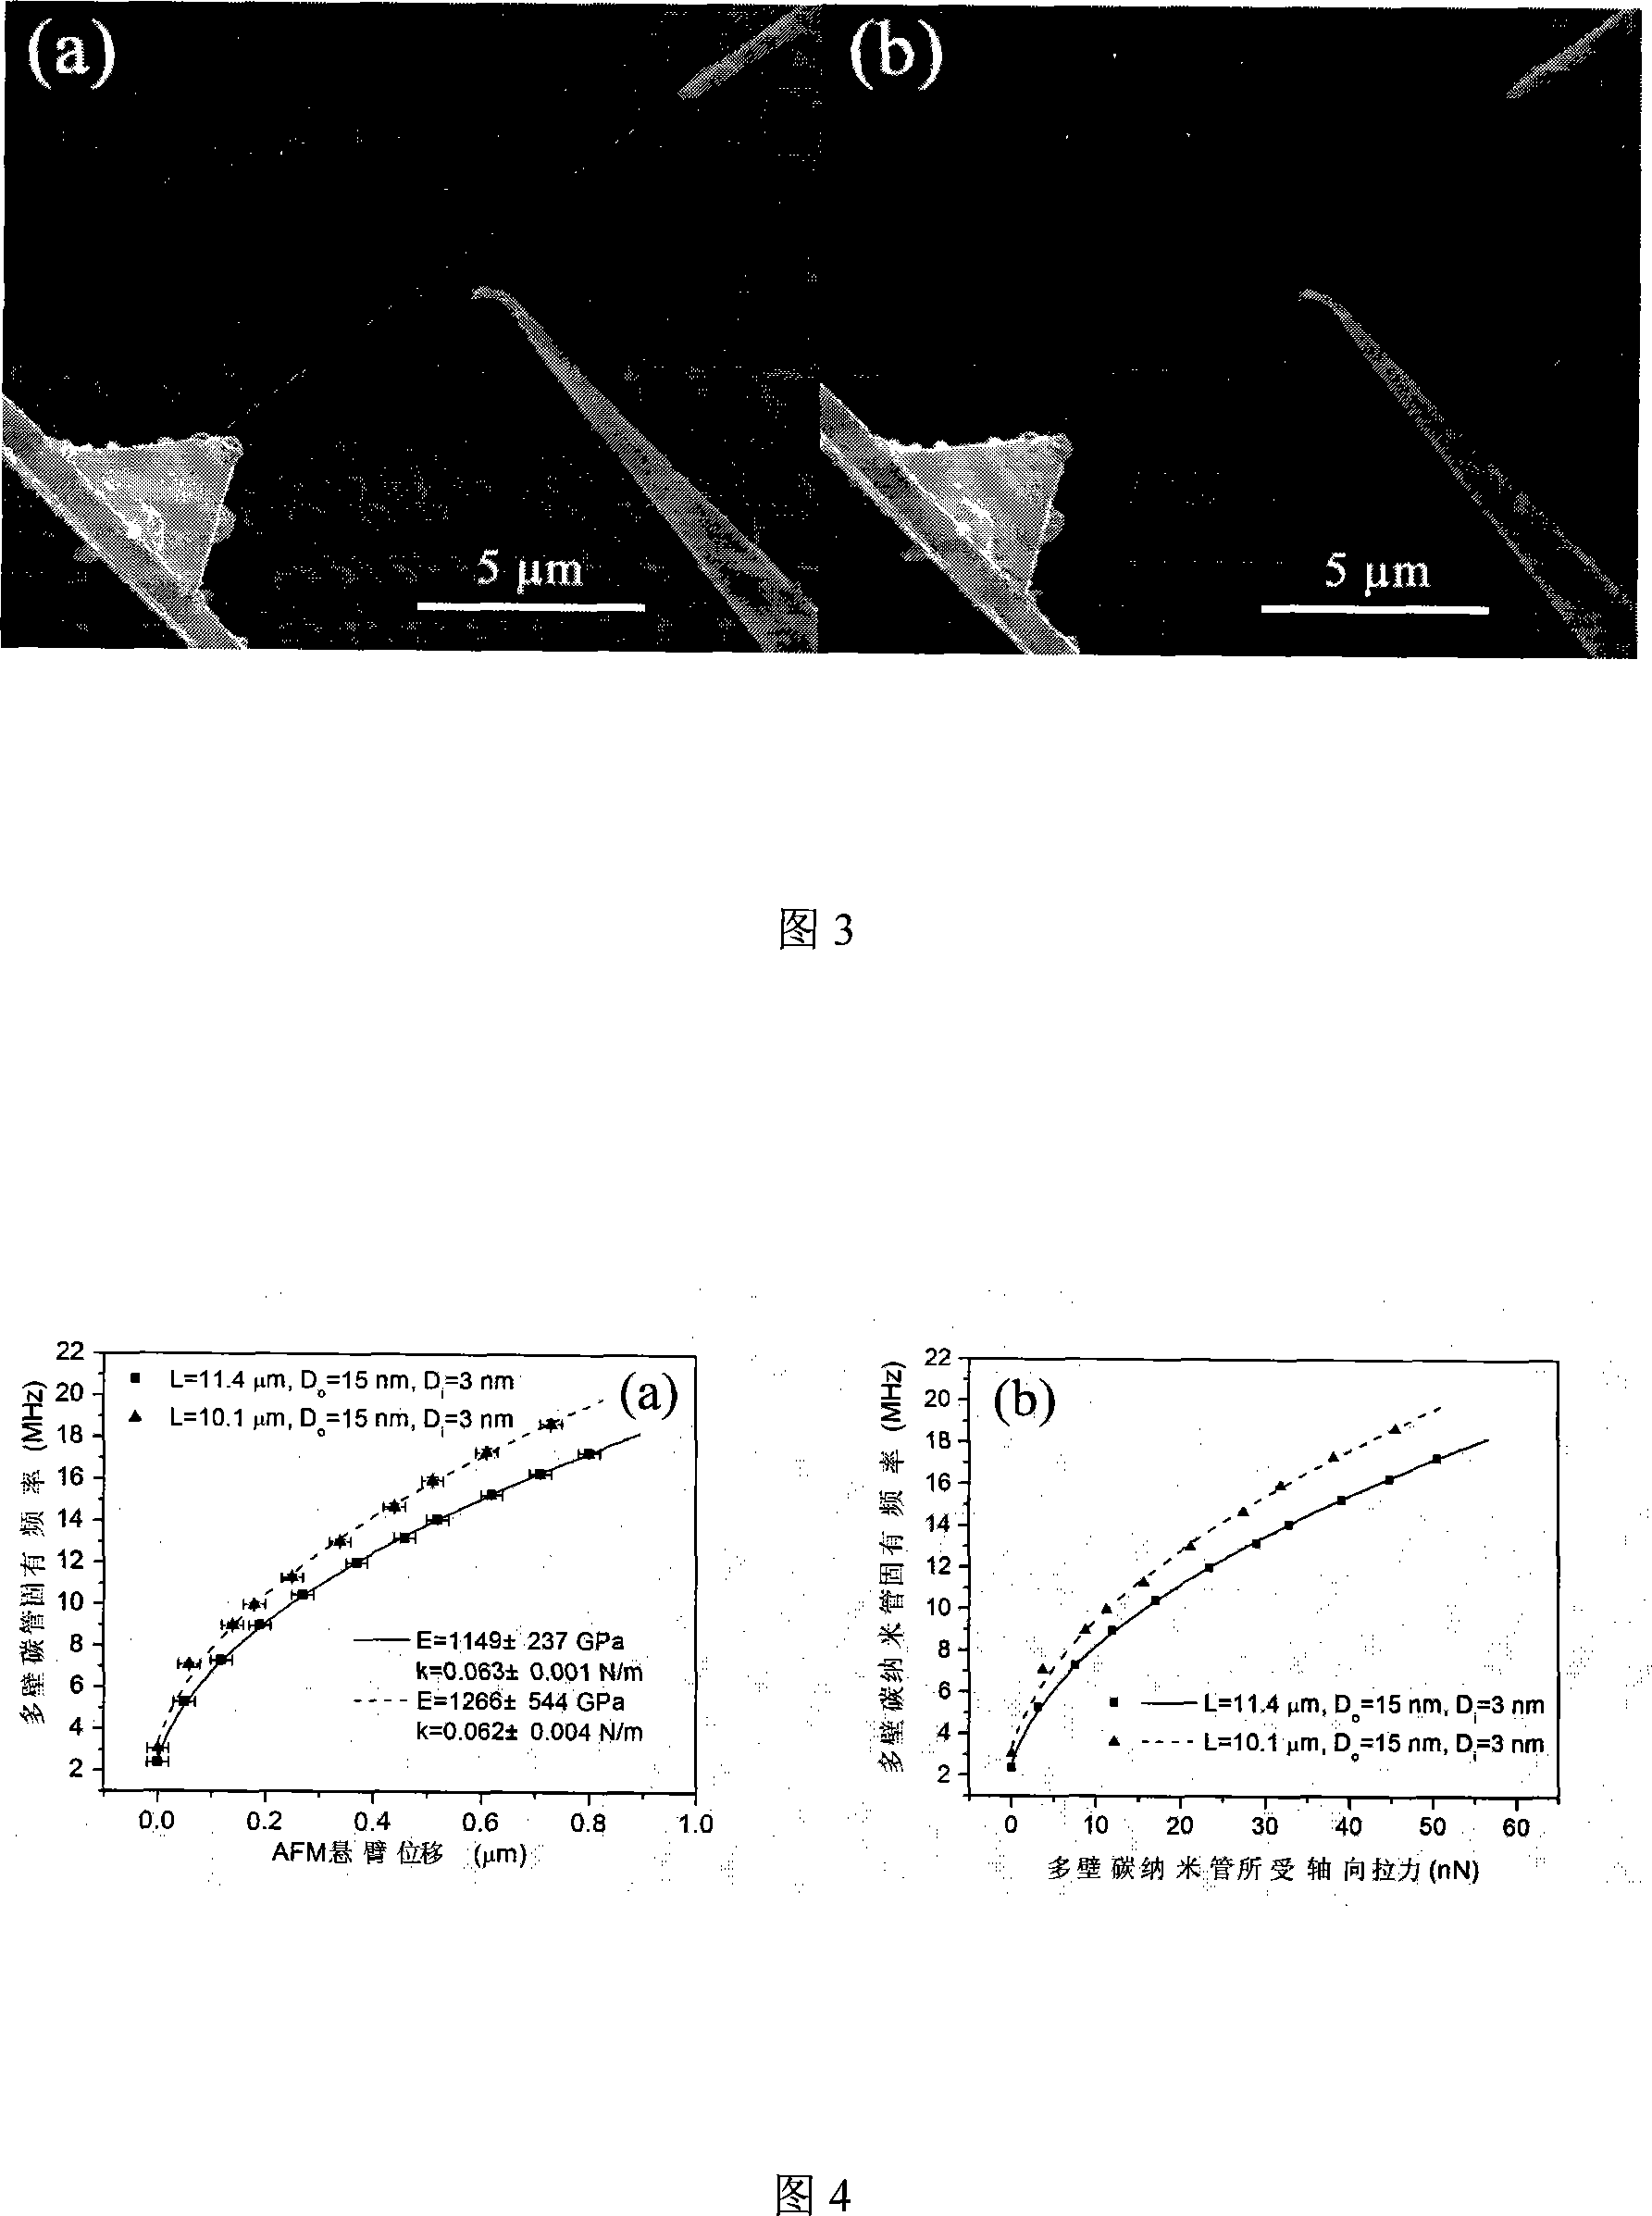 Method for accurately measuring micro-force and measuring micro-cantilever force constant